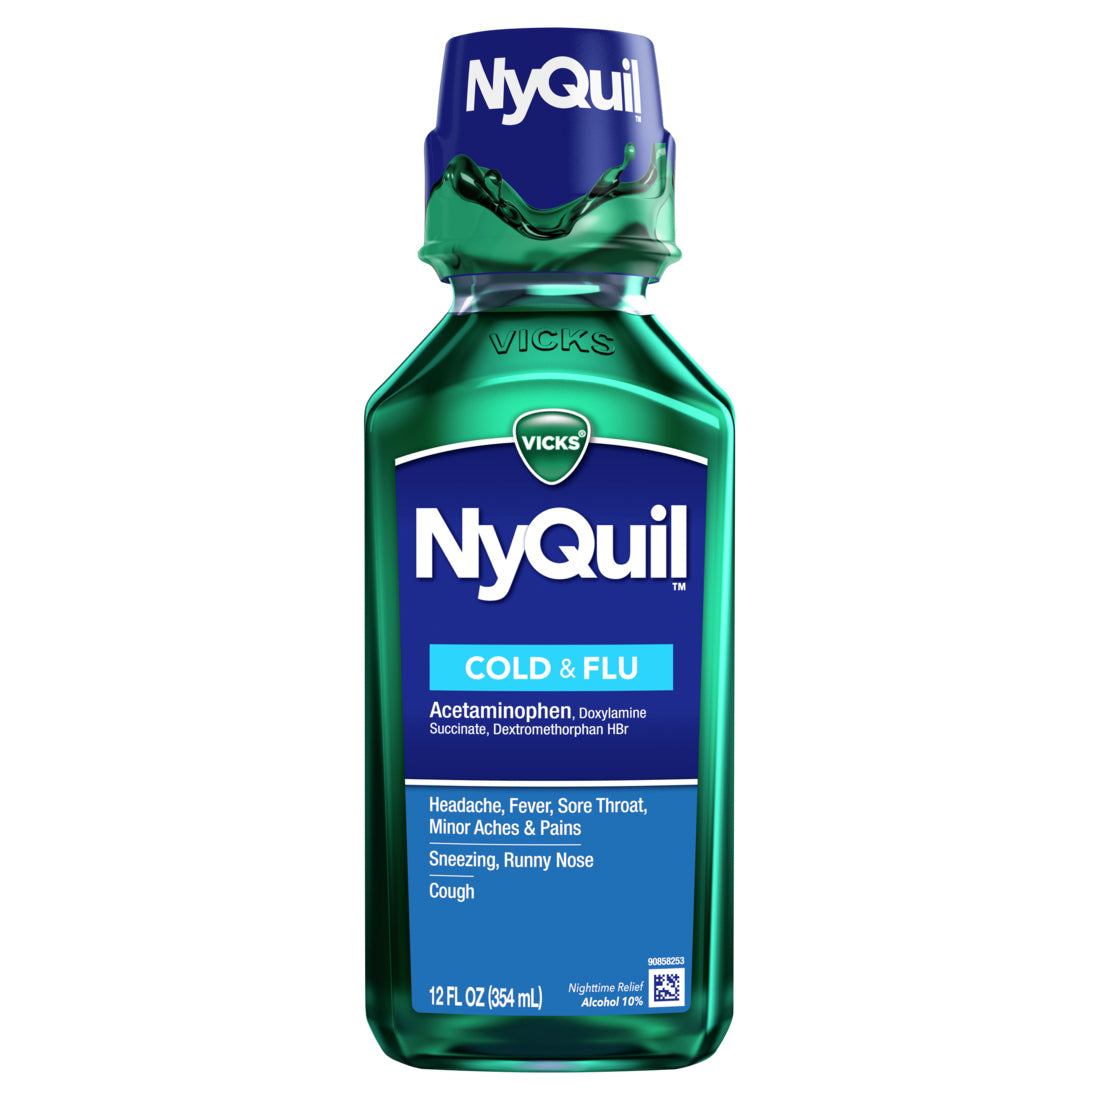 Vicks NyQuil Cold and Flu Relief Liquid Medicine Nighttime Relief - 12oz/12pk